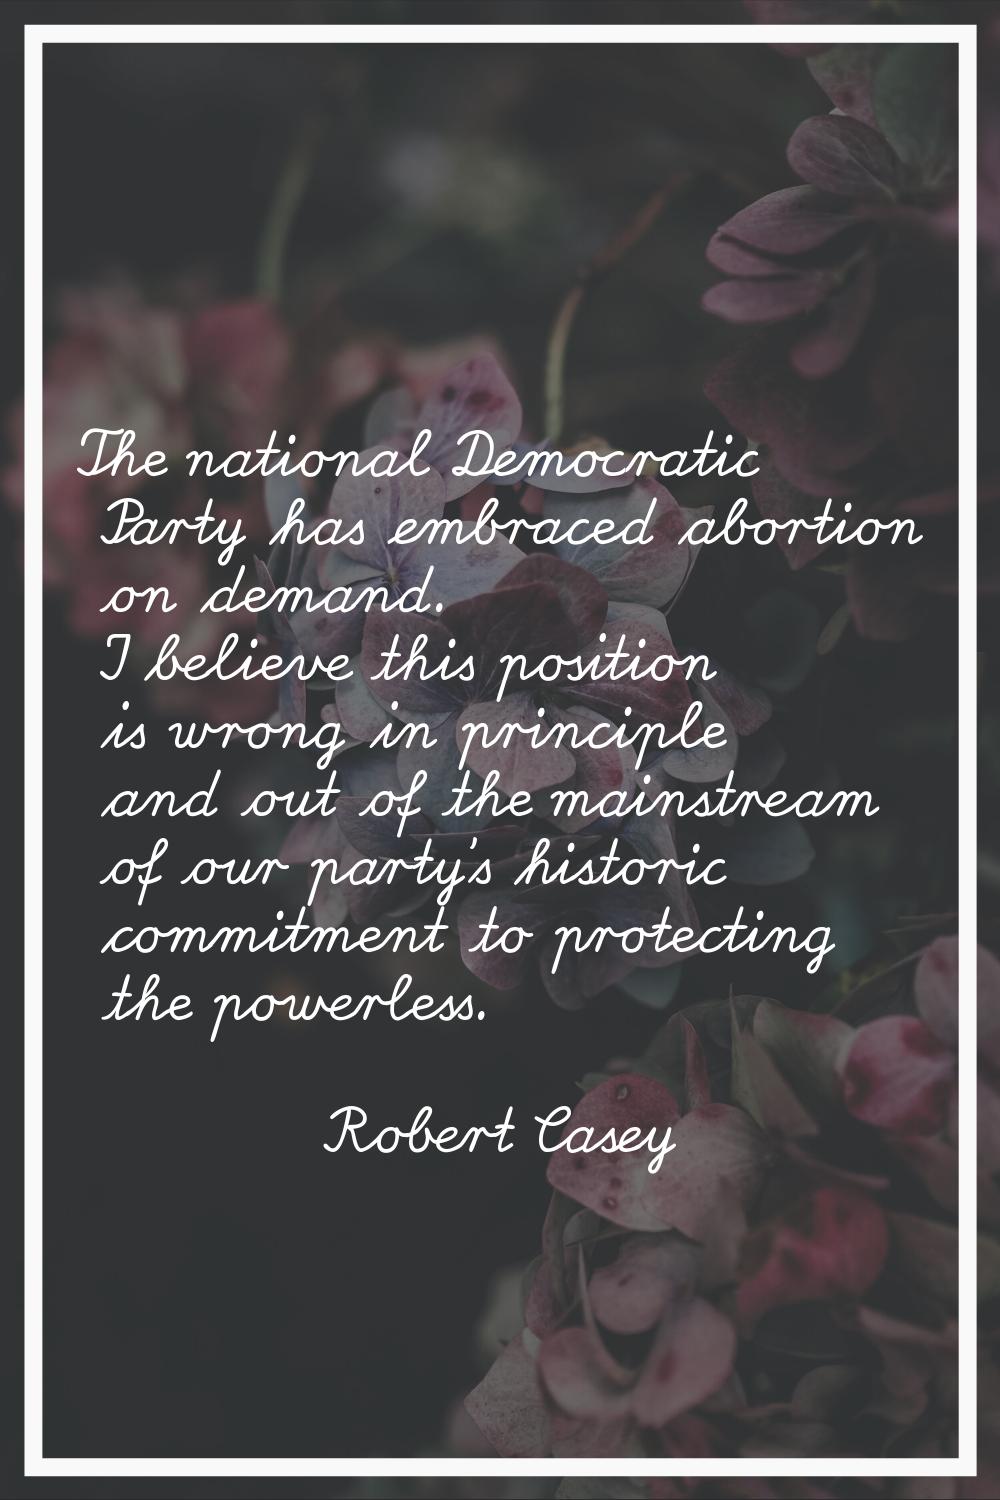 The national Democratic Party has embraced abortion on demand. I believe this position is wrong in 